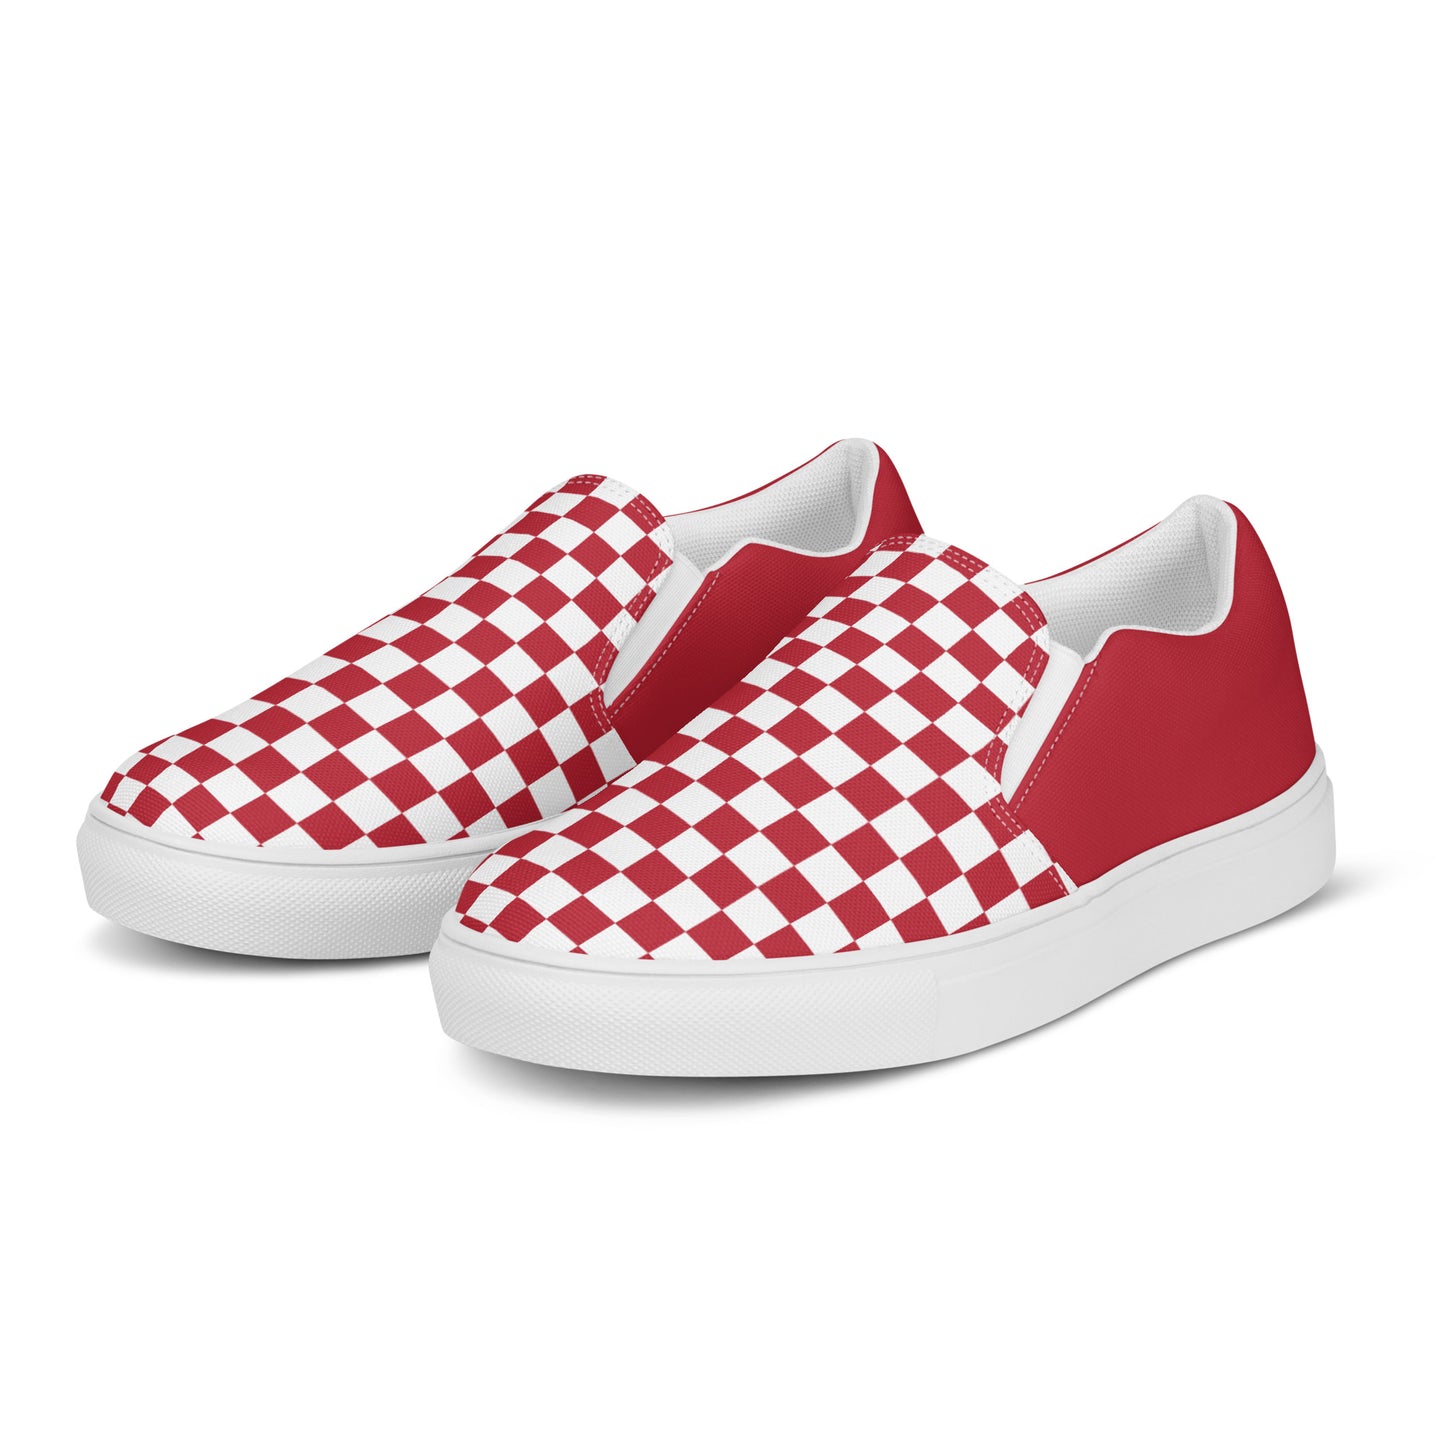 women’s slip-on canvas shoes • red & white checkers